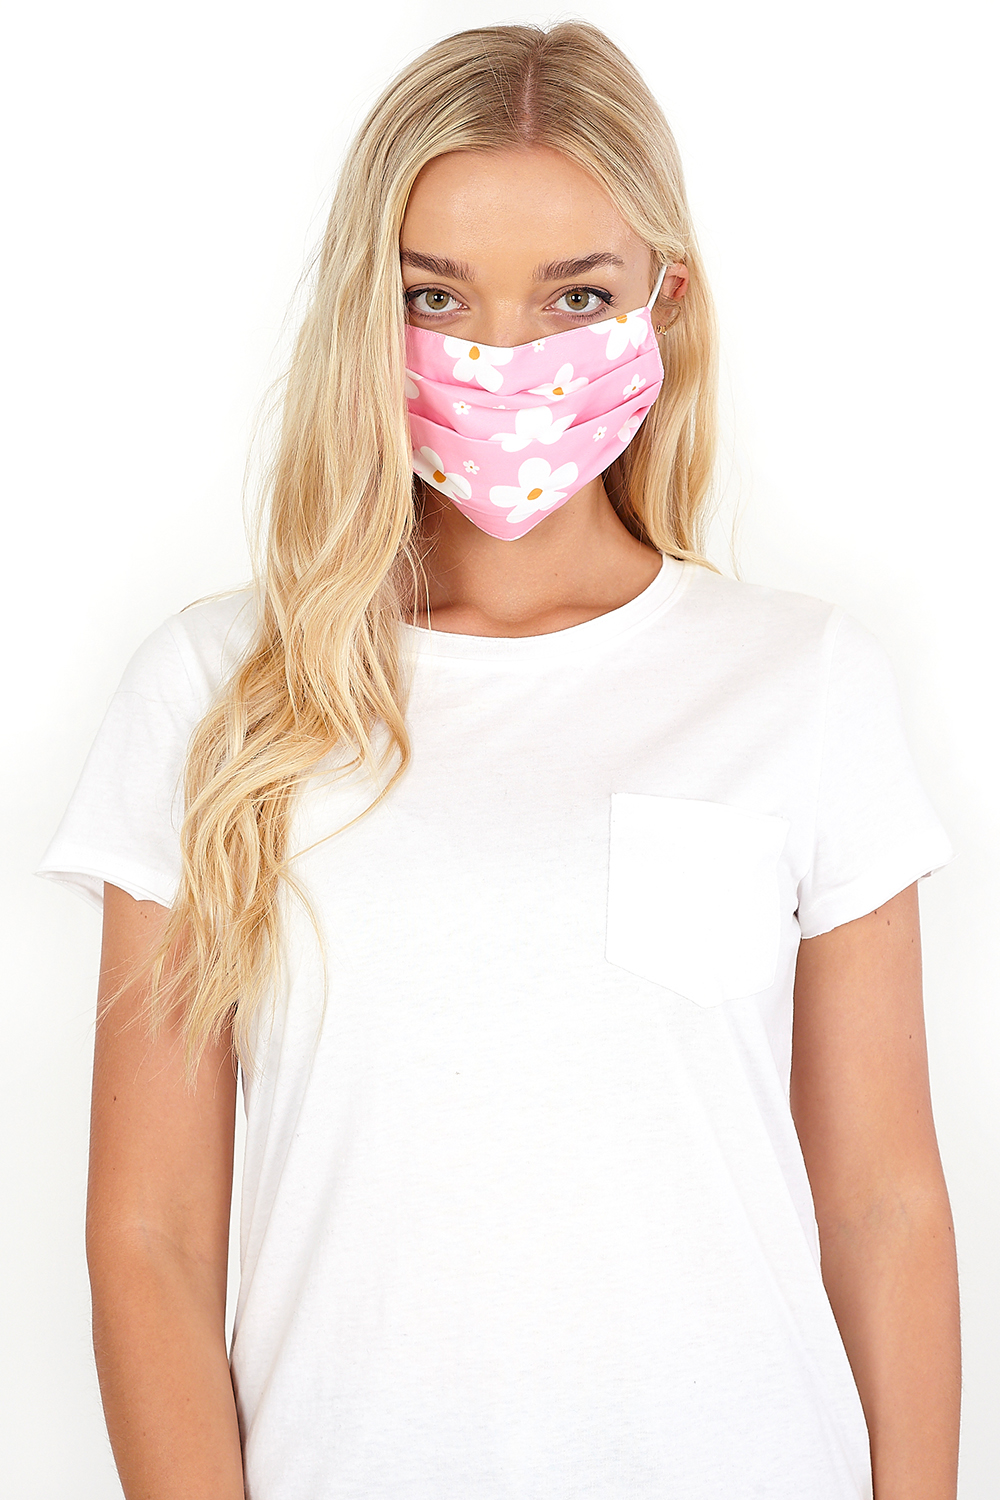 PINK Flower Print Fast Drying Fashion Face Mask, Image 2 of 2